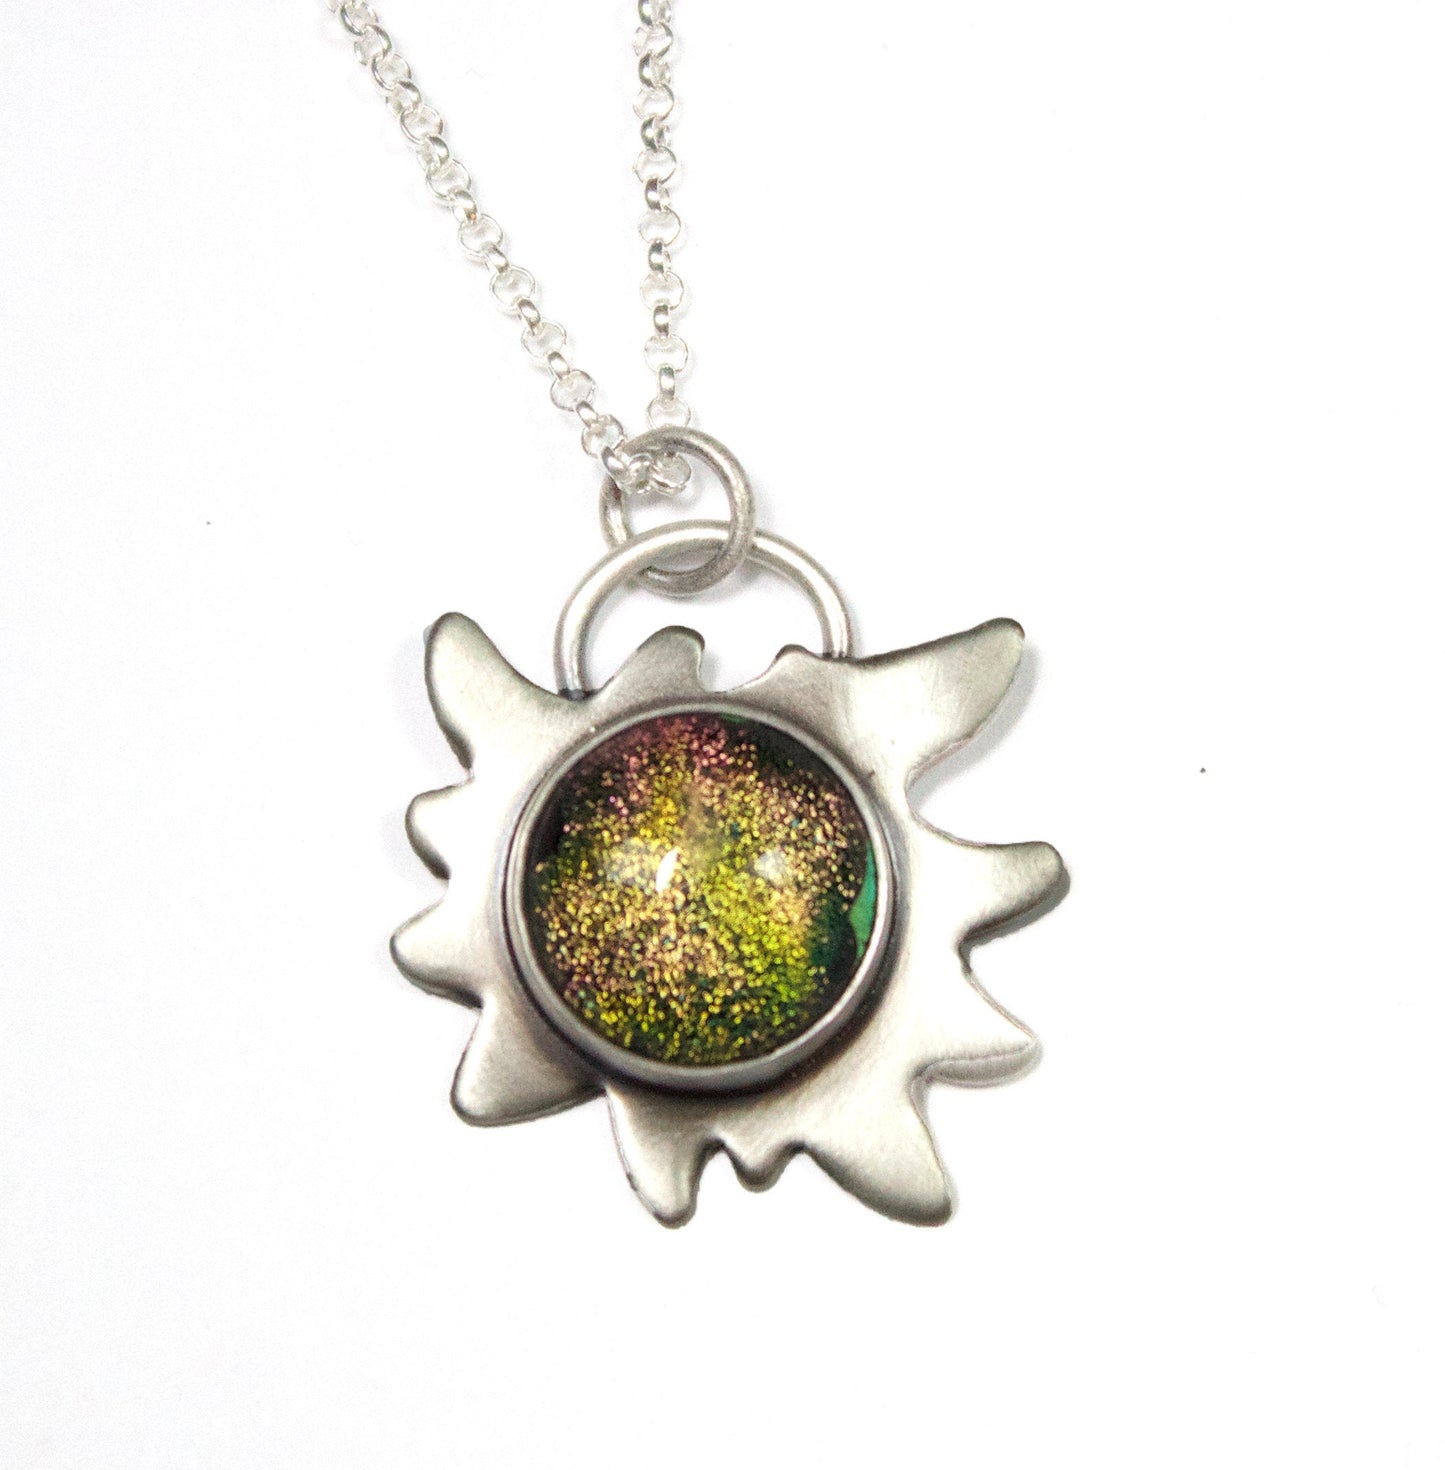 Edelweiss Flower Glass Stone Galaxy Pendant. This a one inch wide pendant made in sterling silver. The center is dichroic glass with sparkling bits in a golden color. The silver is shoped like an edelweiss flower. The sterling silver pendant comes on a rolo chain.